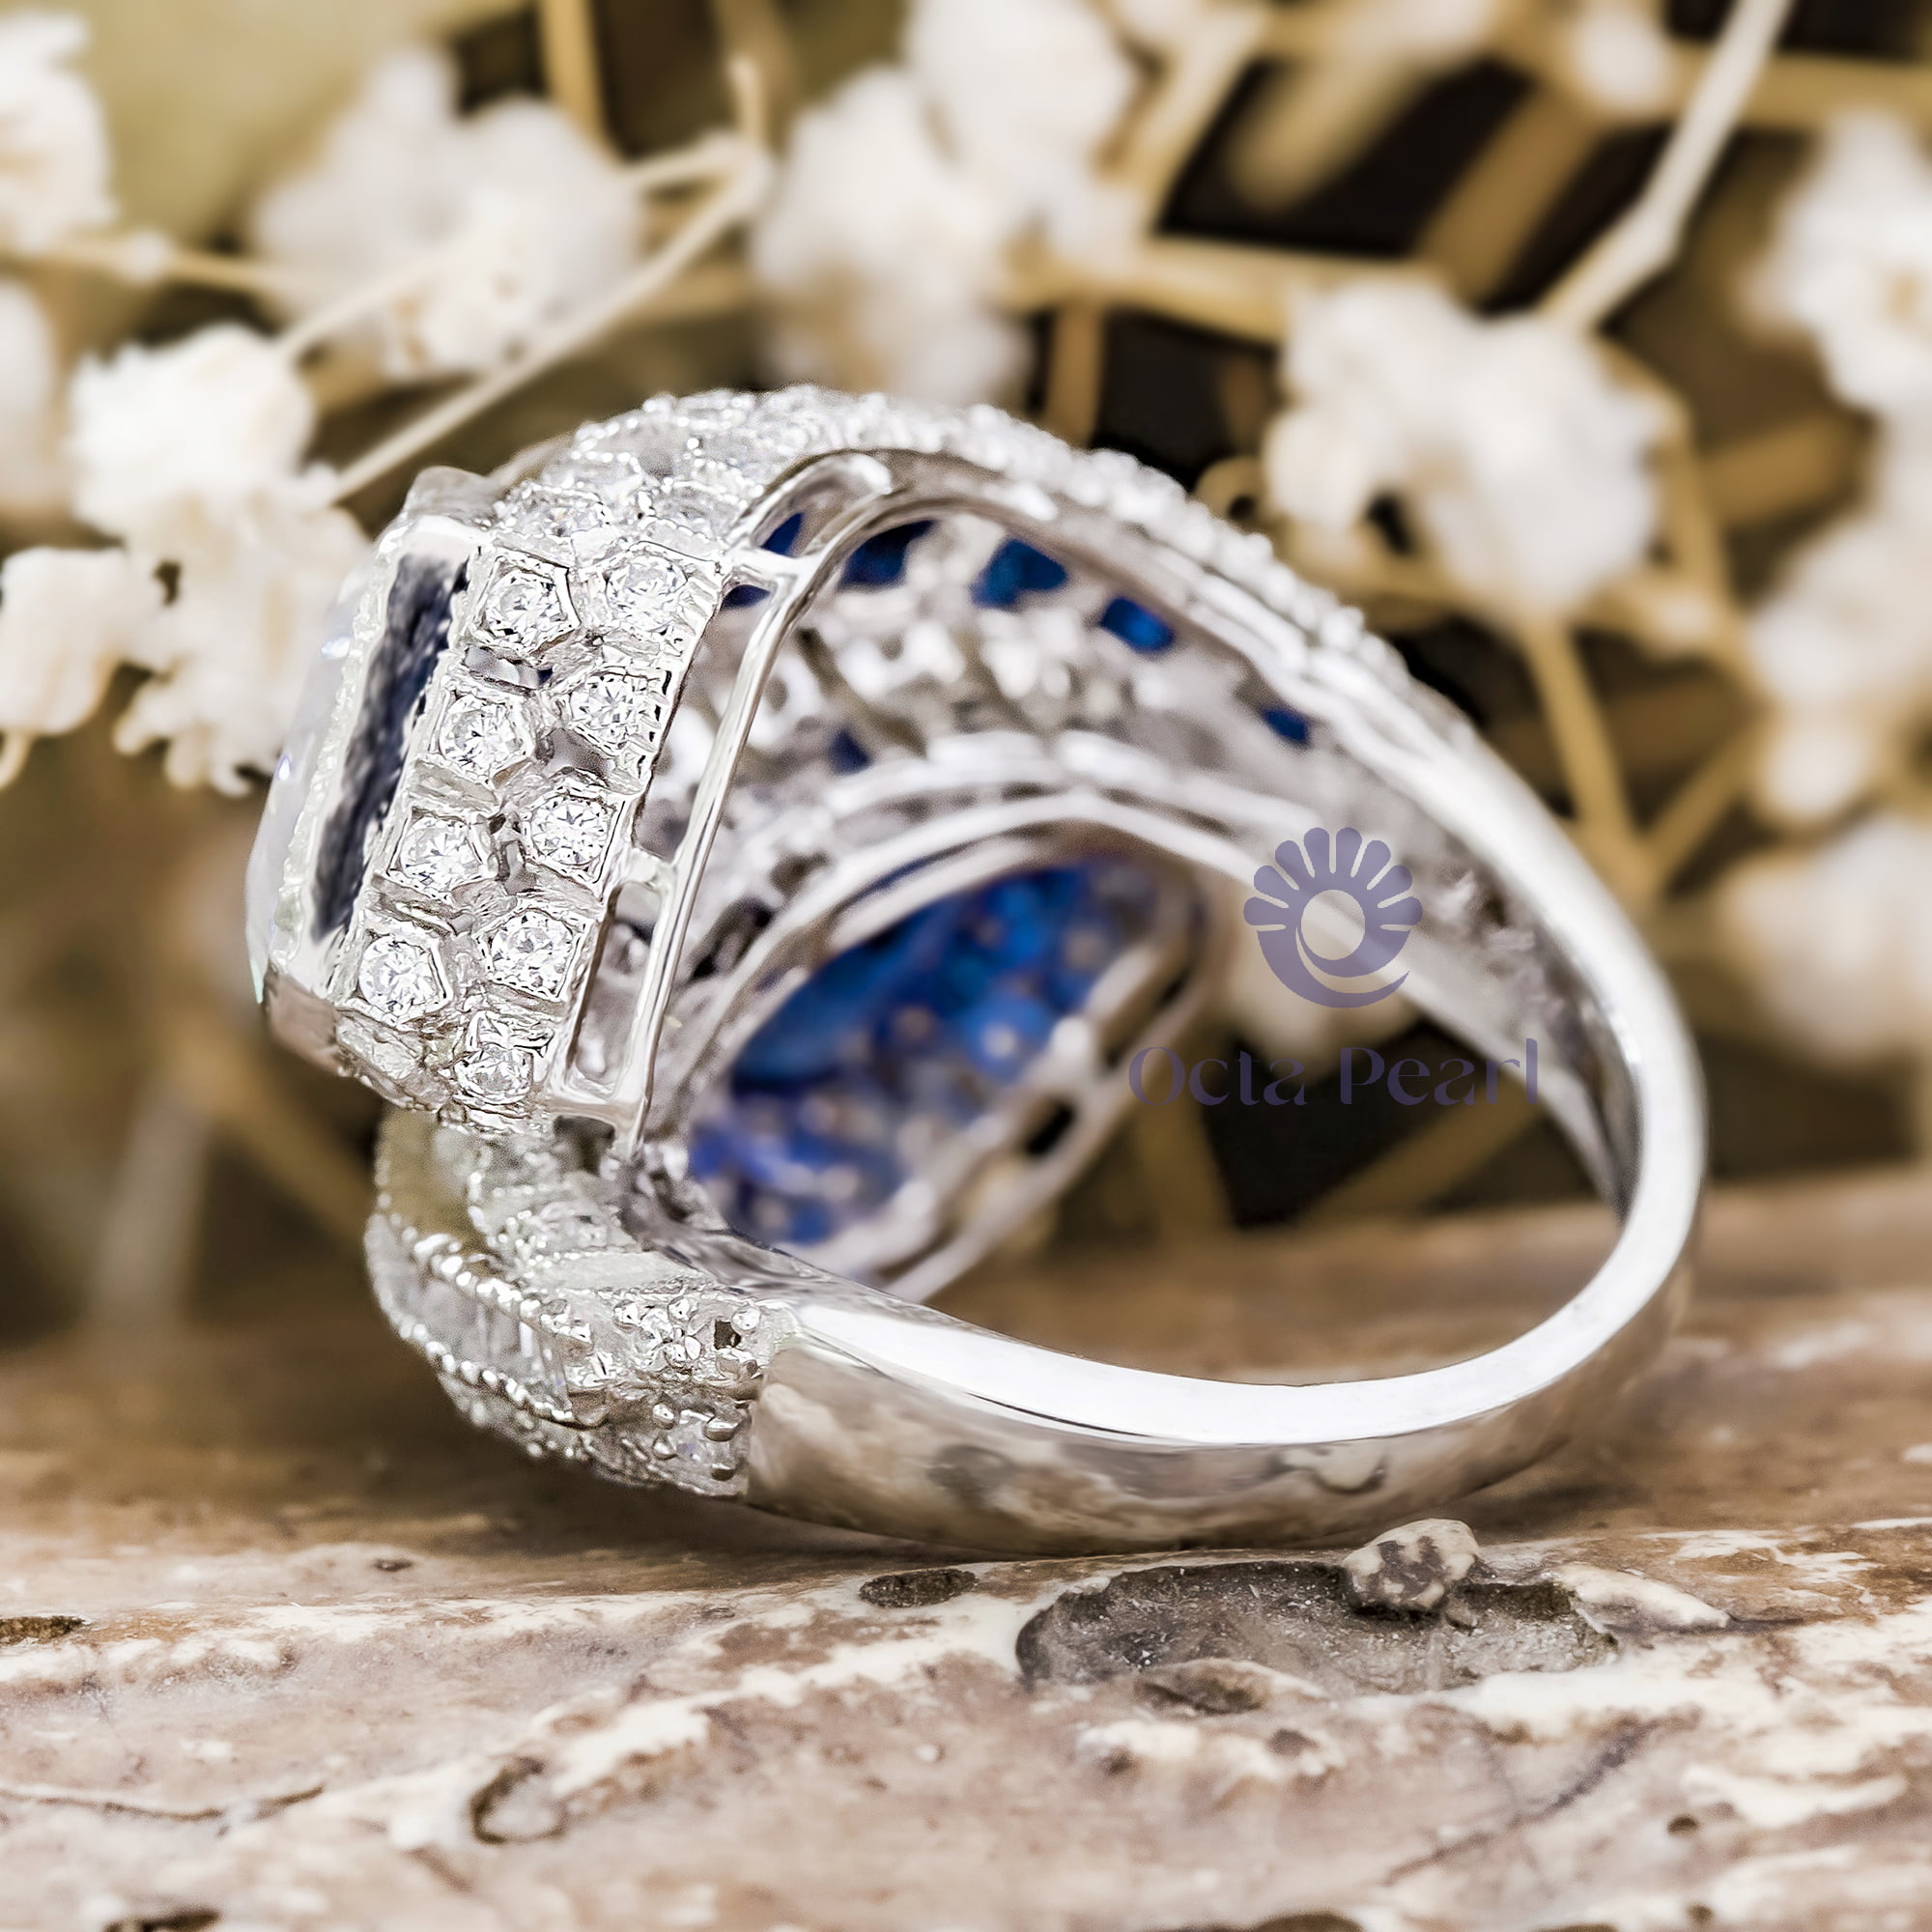 Blue Sapphire & White Fancy Cut With Baguette Cut CZ Stone Bypass Shank- Channel Setting Art Deco Ring